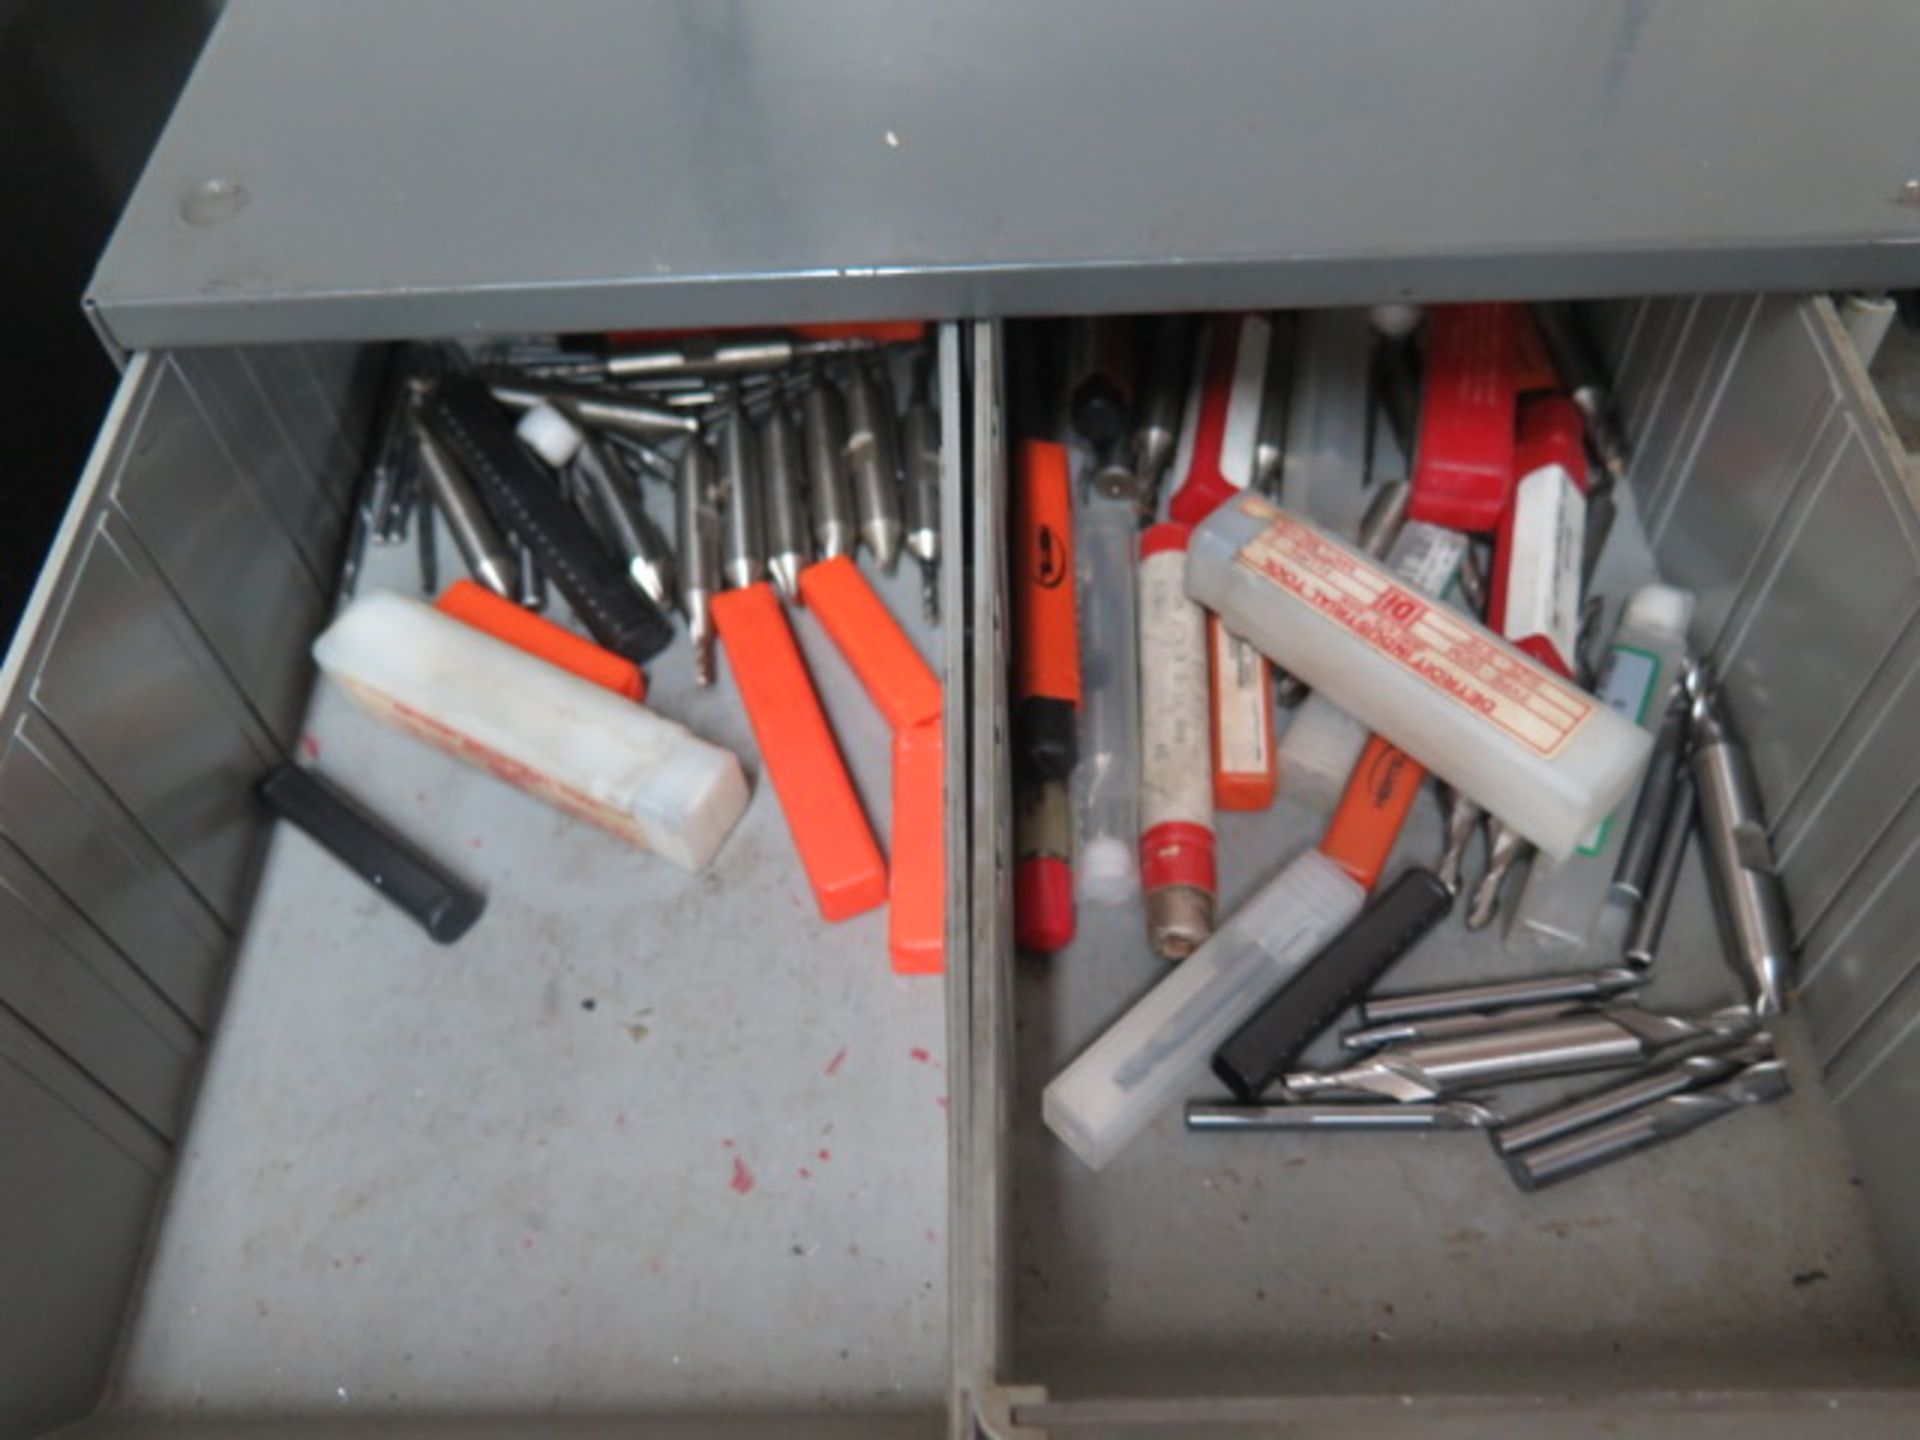 Carbide and High Speed Endmills, Carbide Inserts, Mill Slot Cutters and Hardware w/ Cabinets (SOLD - Image 2 of 8